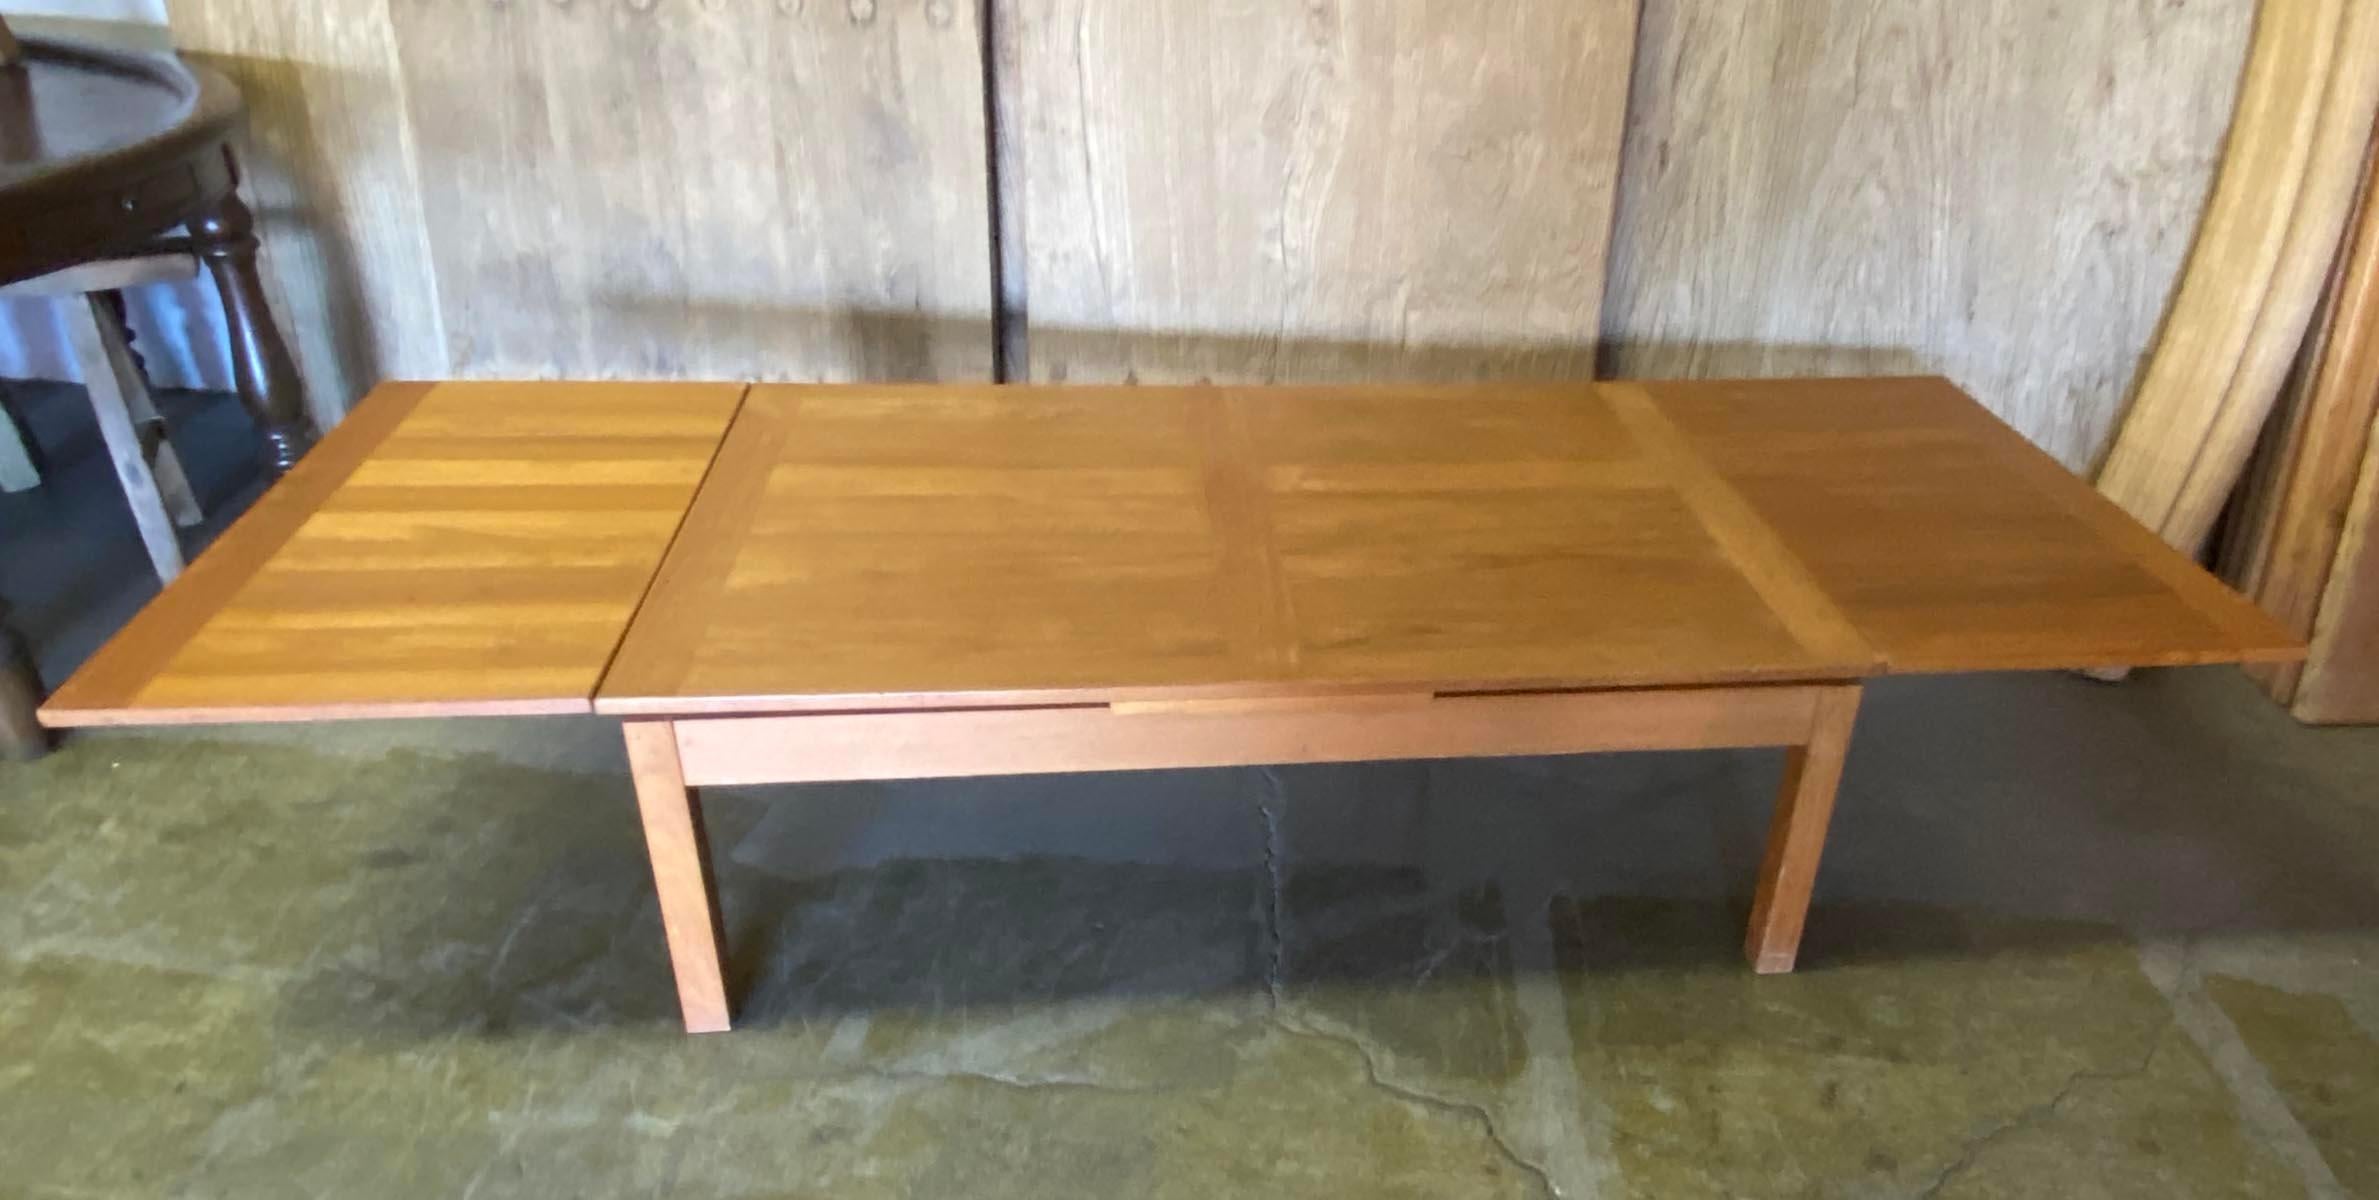 Teak veneer coffee table that extends to 93 inches long with extensions on each side. Vintage condition with a few scuffs but still great!